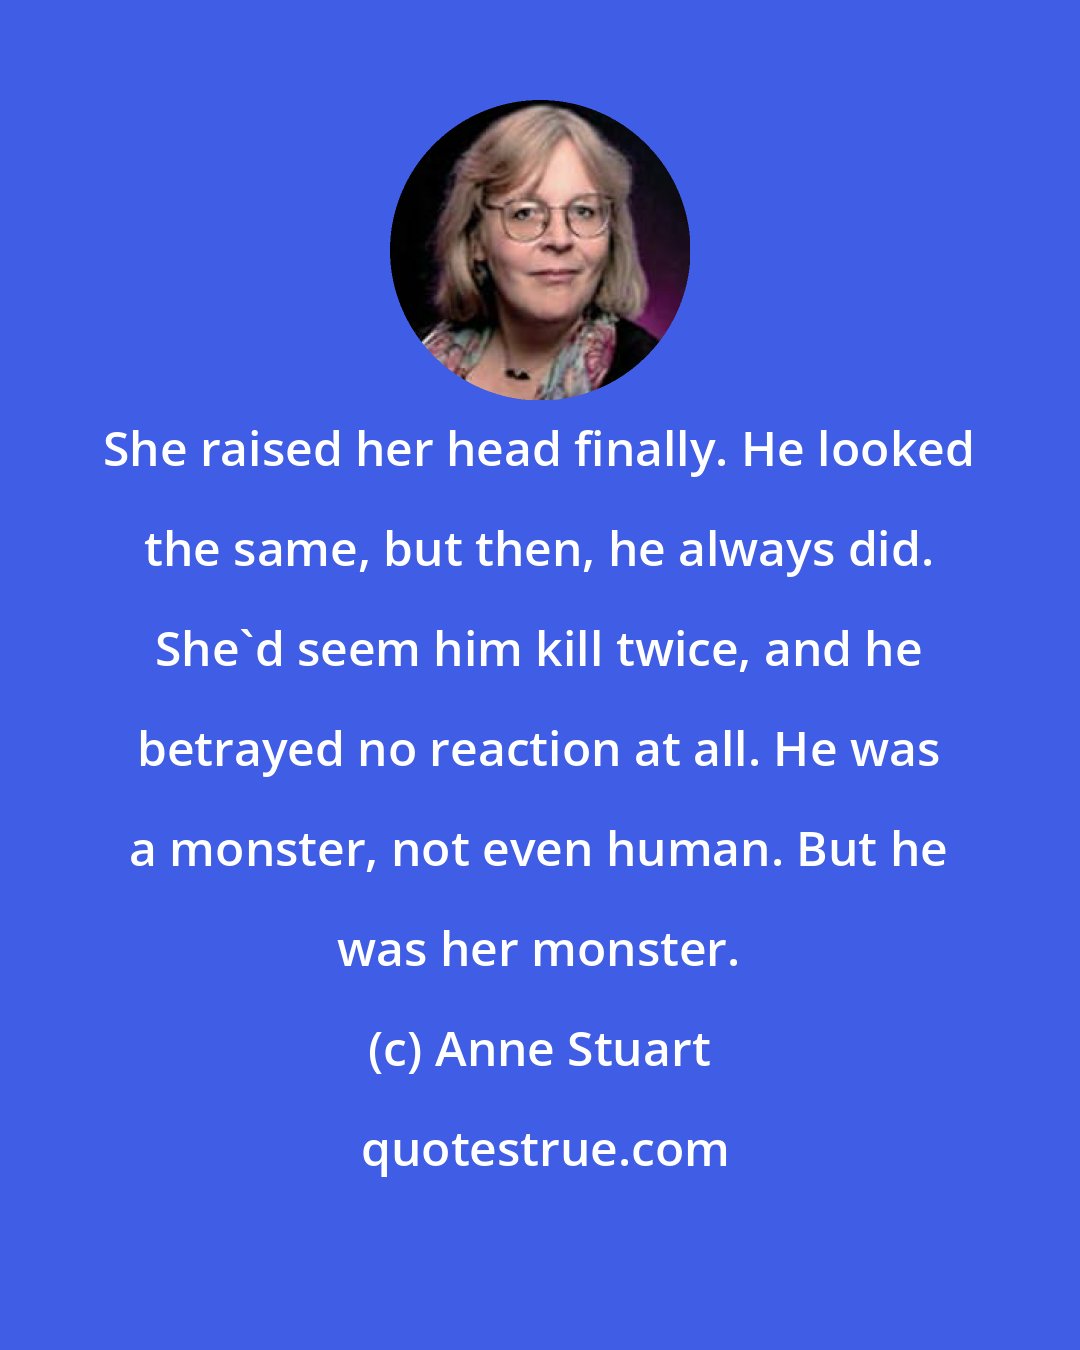 Anne Stuart: She raised her head finally. He looked the same, but then, he always did. She'd seem him kill twice, and he betrayed no reaction at all. He was a monster, not even human. But he was her monster.